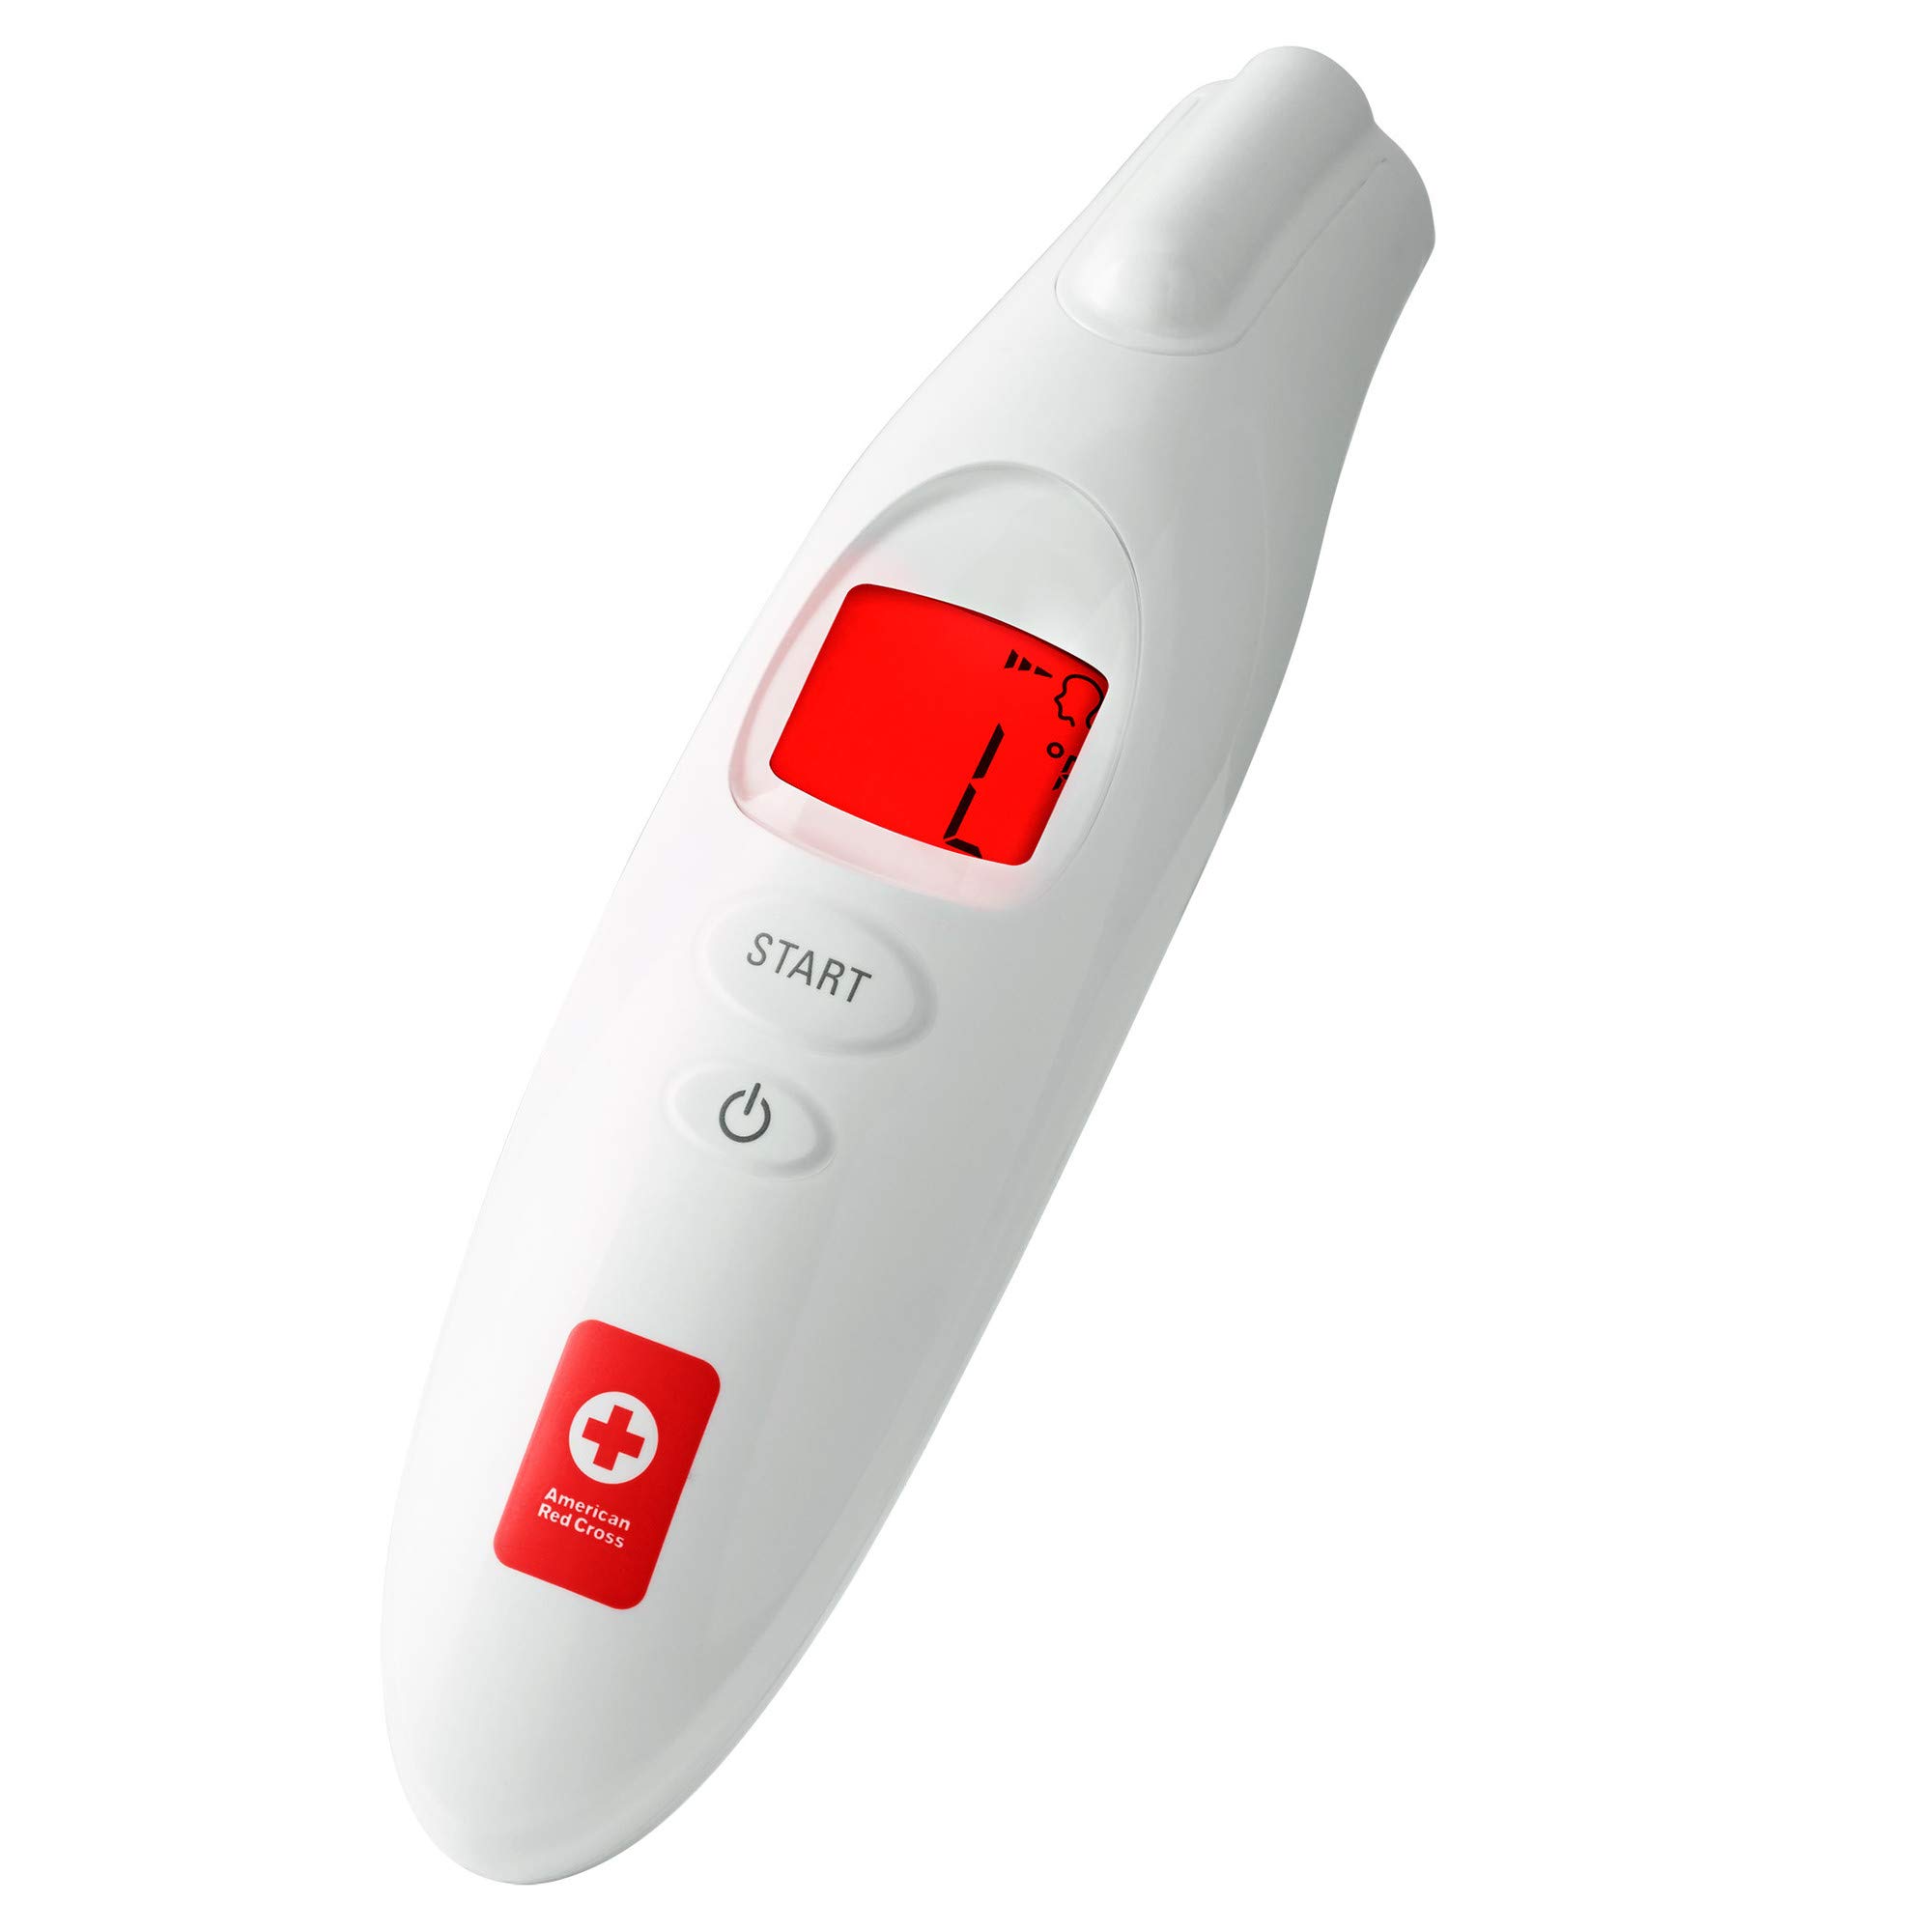 American Red Cross Digital Infrared Forehead No-Touch Thermometer for Adults and Kids (Pack of 2)